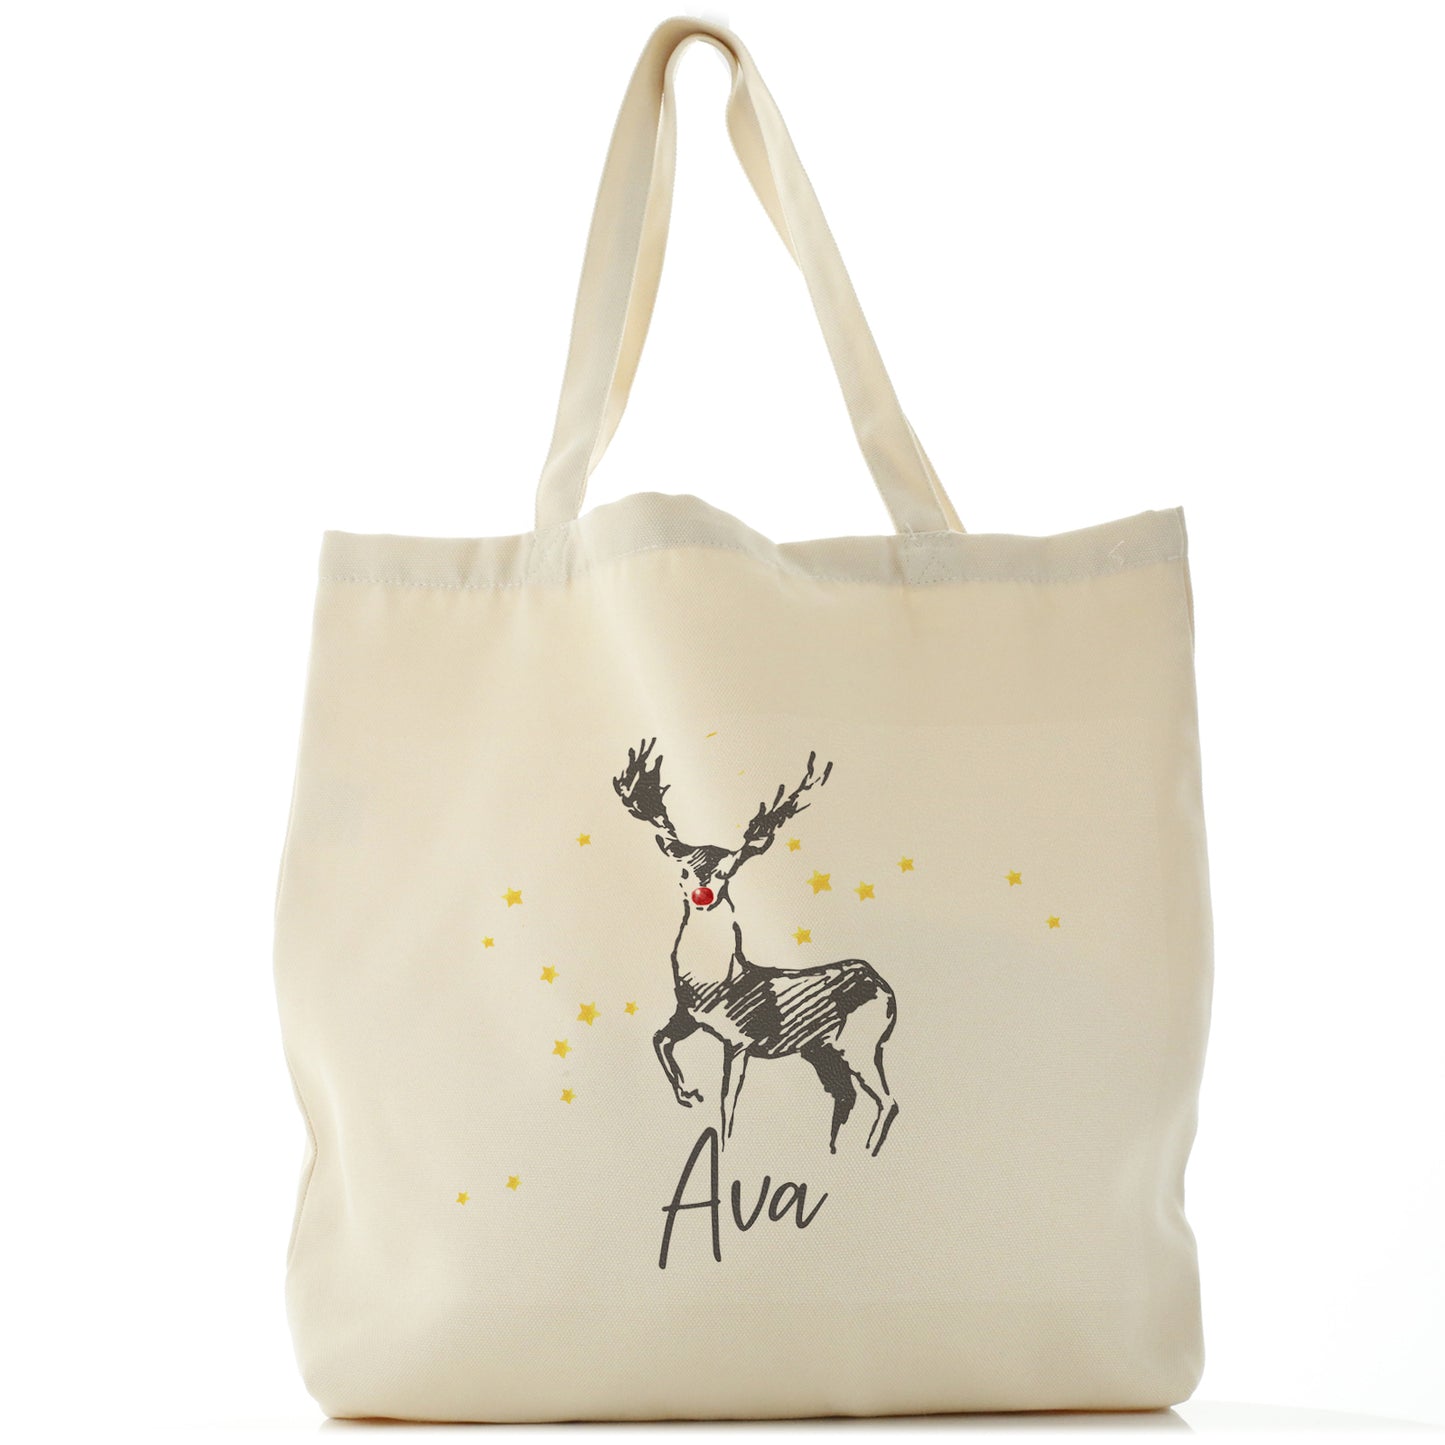 Personalised Canvas Tote Bag with Stylish Text and Red Nose Reindeer Star Sketch